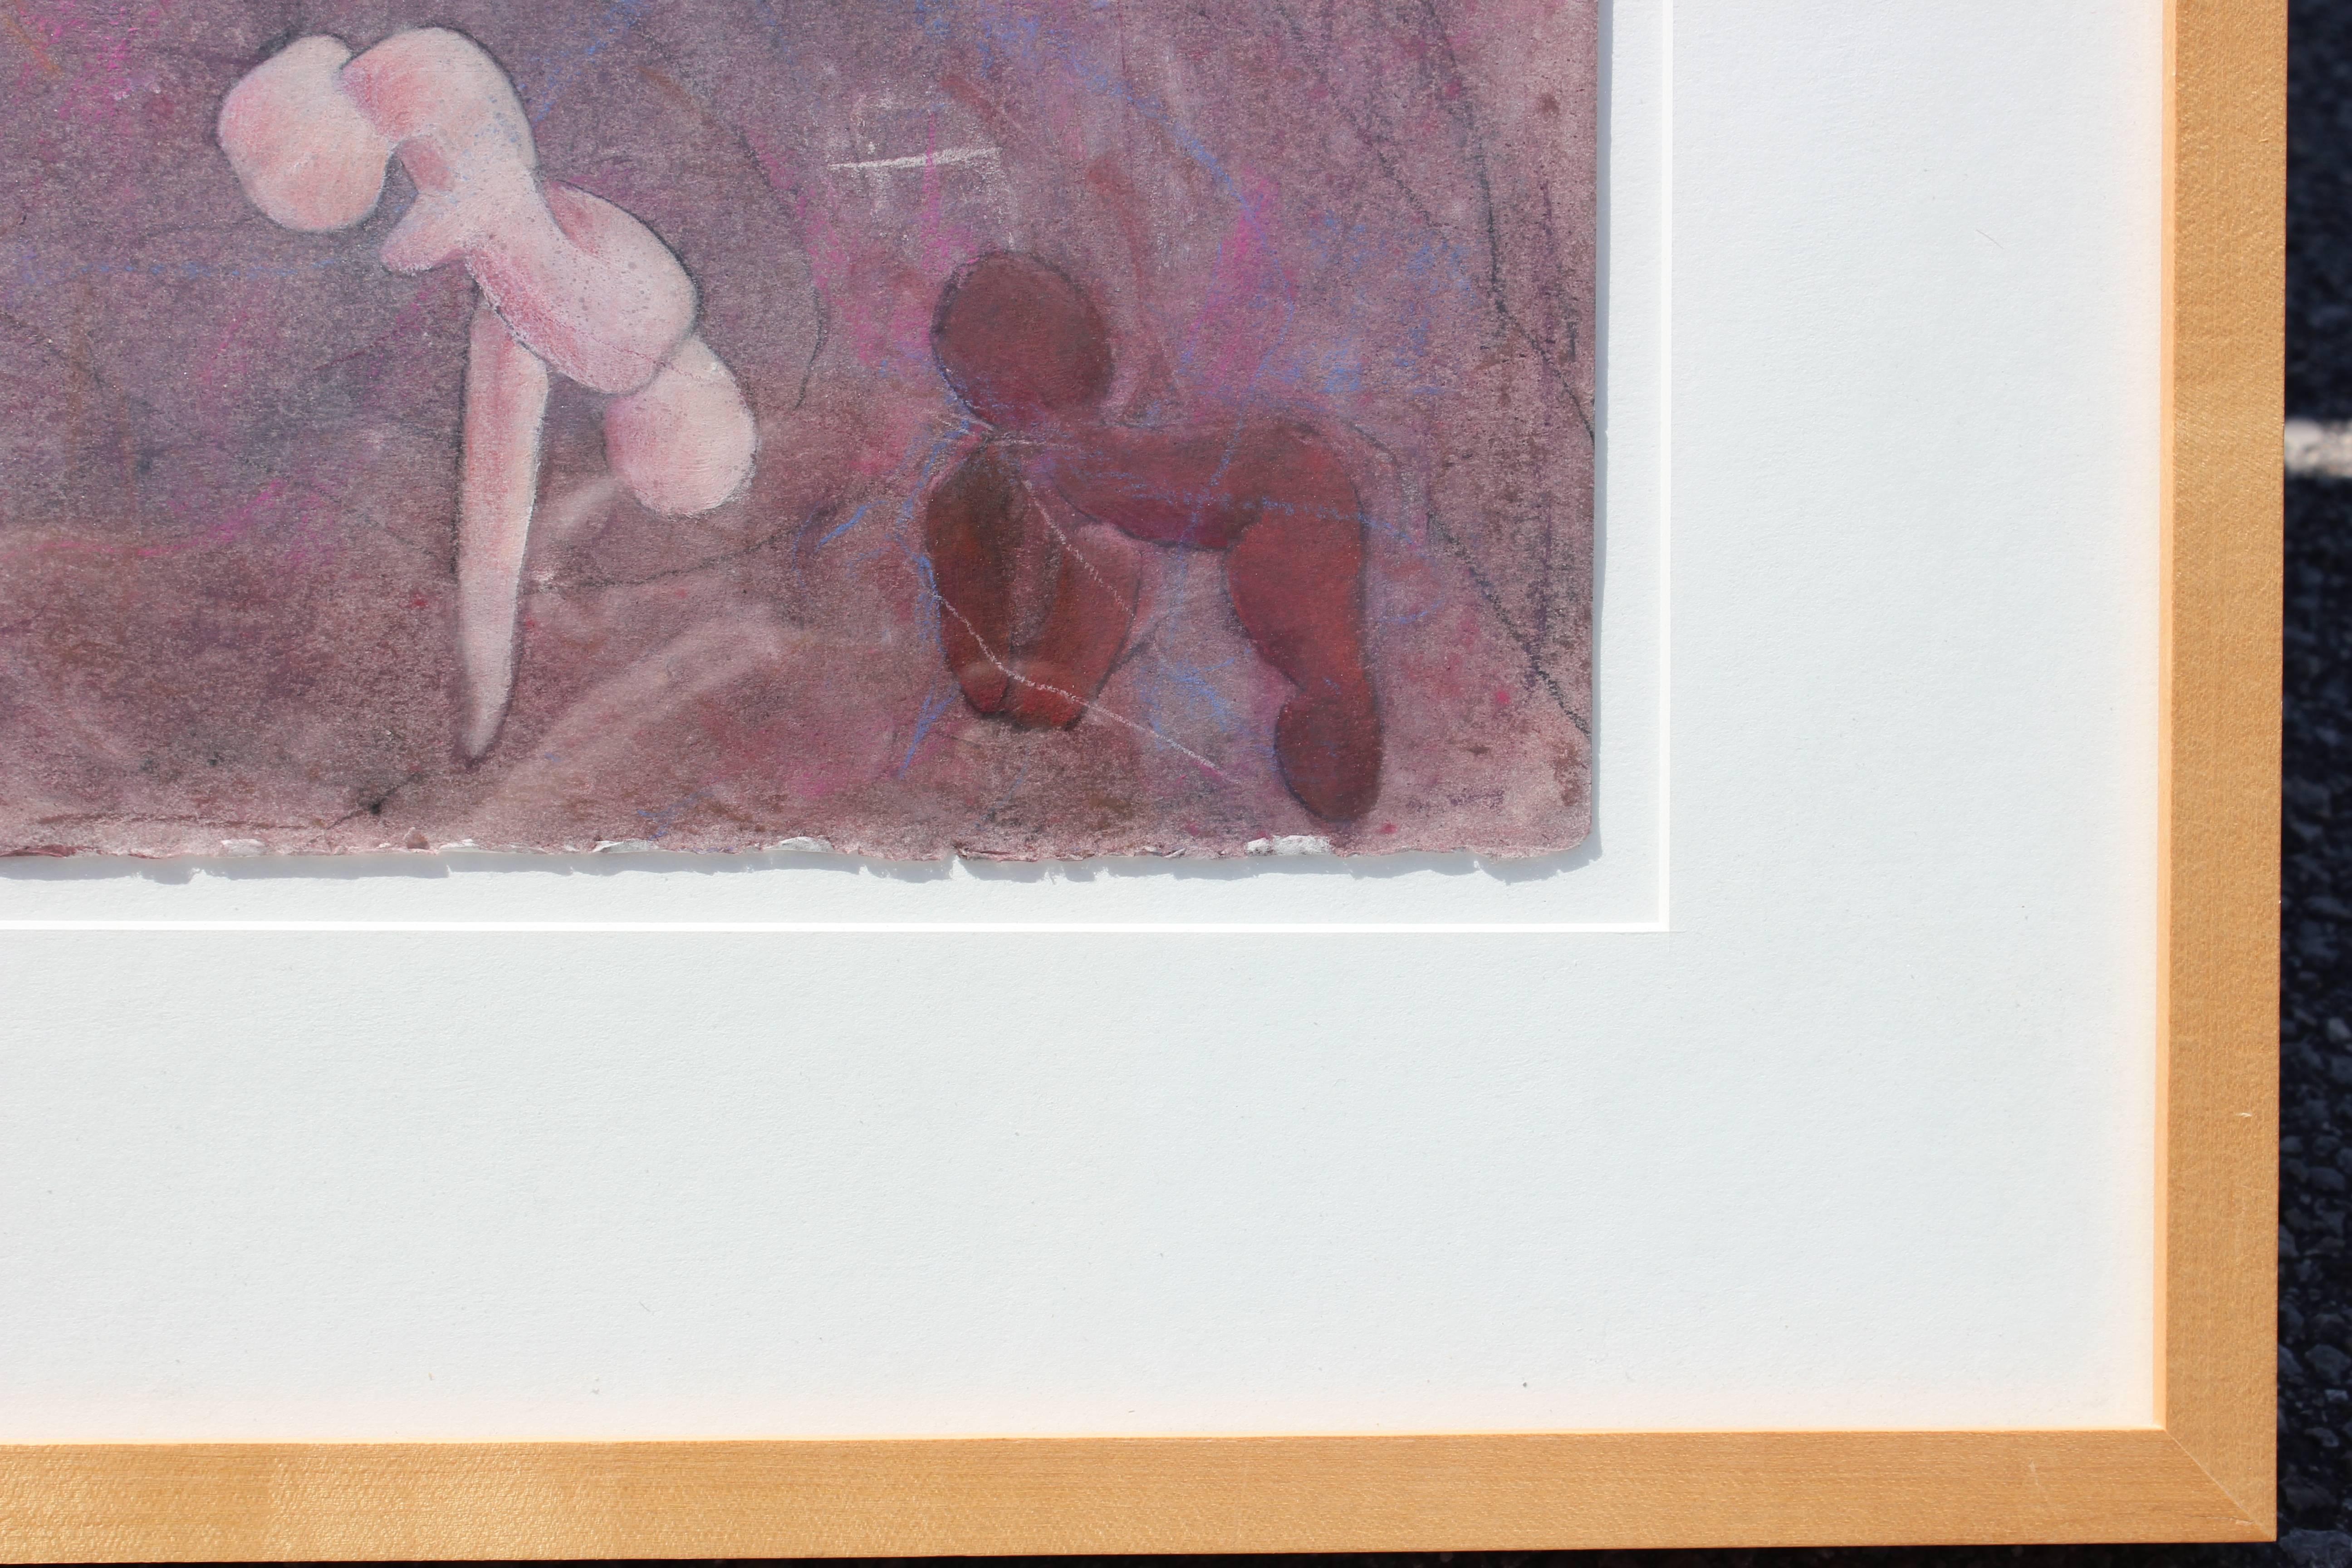 Purple pastel image with various humanoid figures scattered around the image. Gallery tag on the back of the painting titles and attributes the work. Framed in a light wooden frame with a white matte.

Artist Biography: Helen Belton Orman's life was